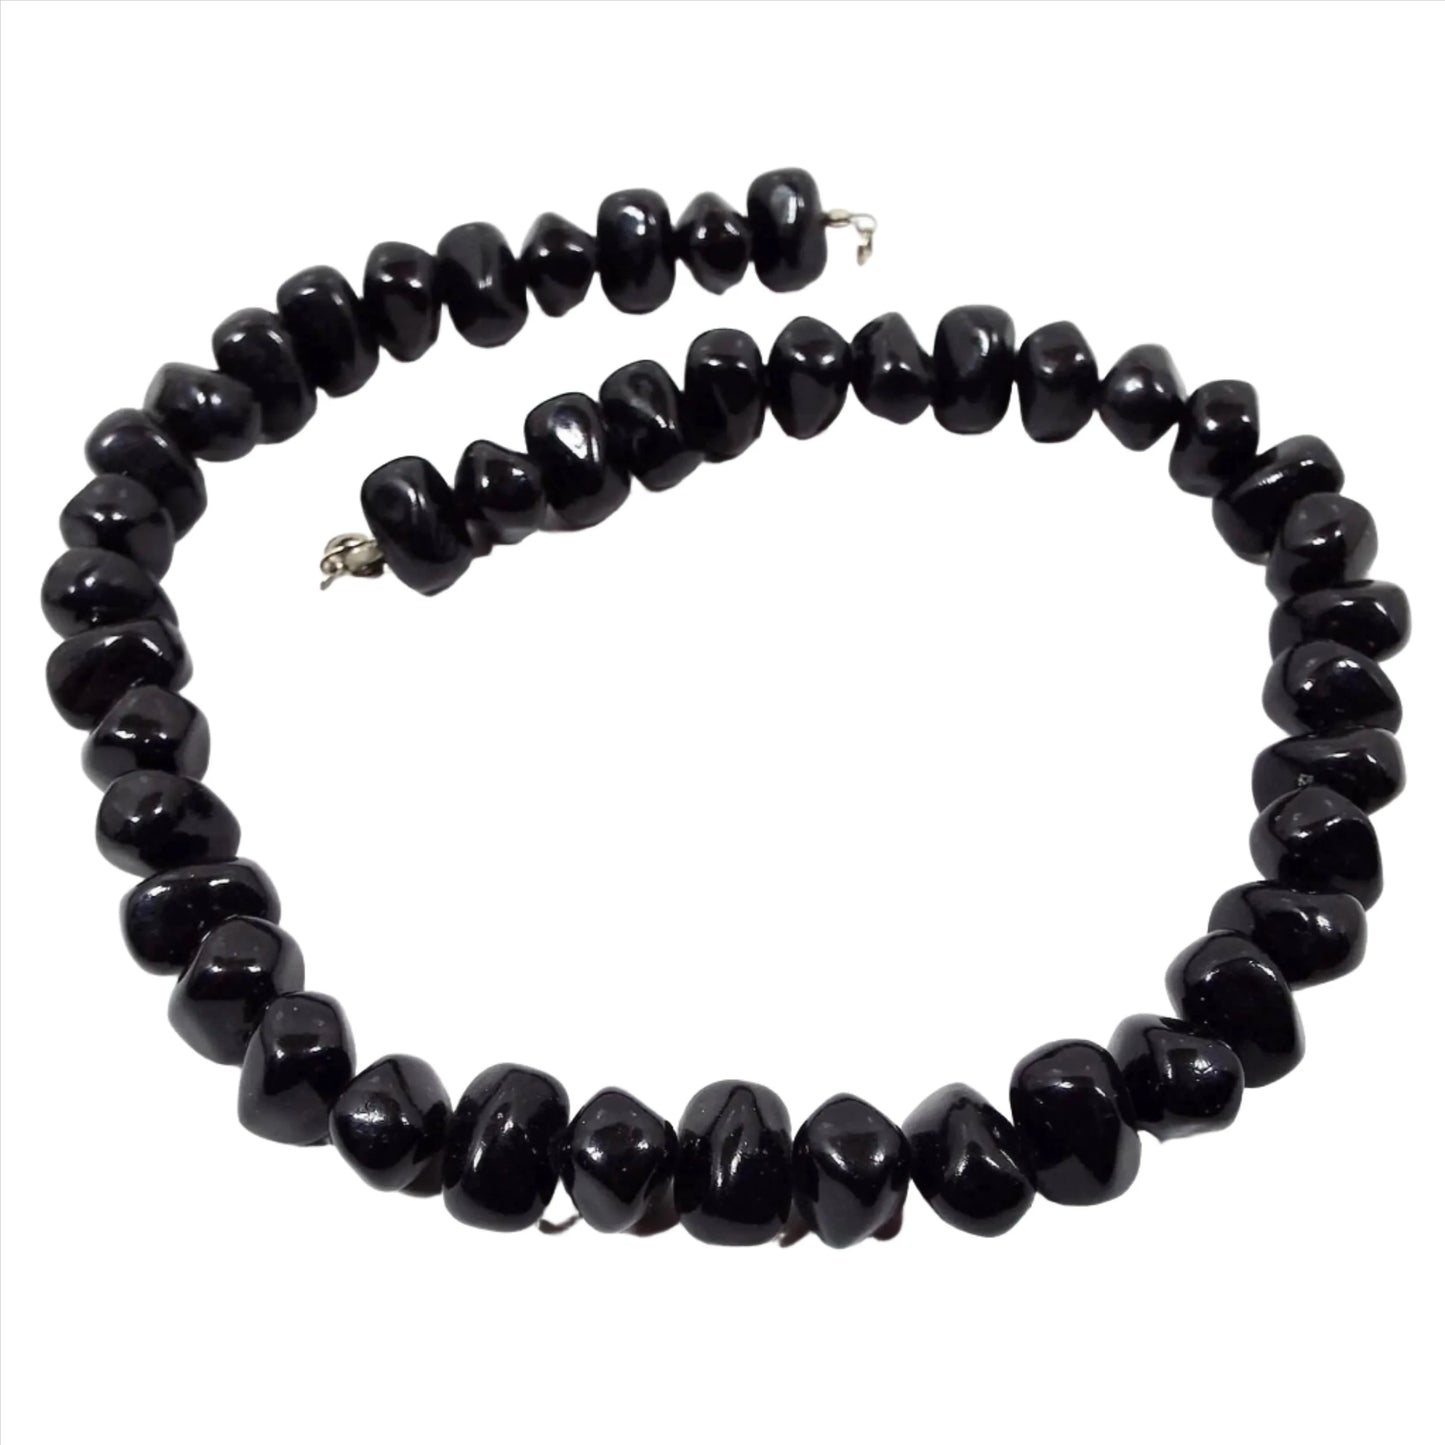 Front view of the retro vintage black beaded necklace. The beads are chunky nugget style black plastic beads. There is a silver tone spring ring clasp at the end.